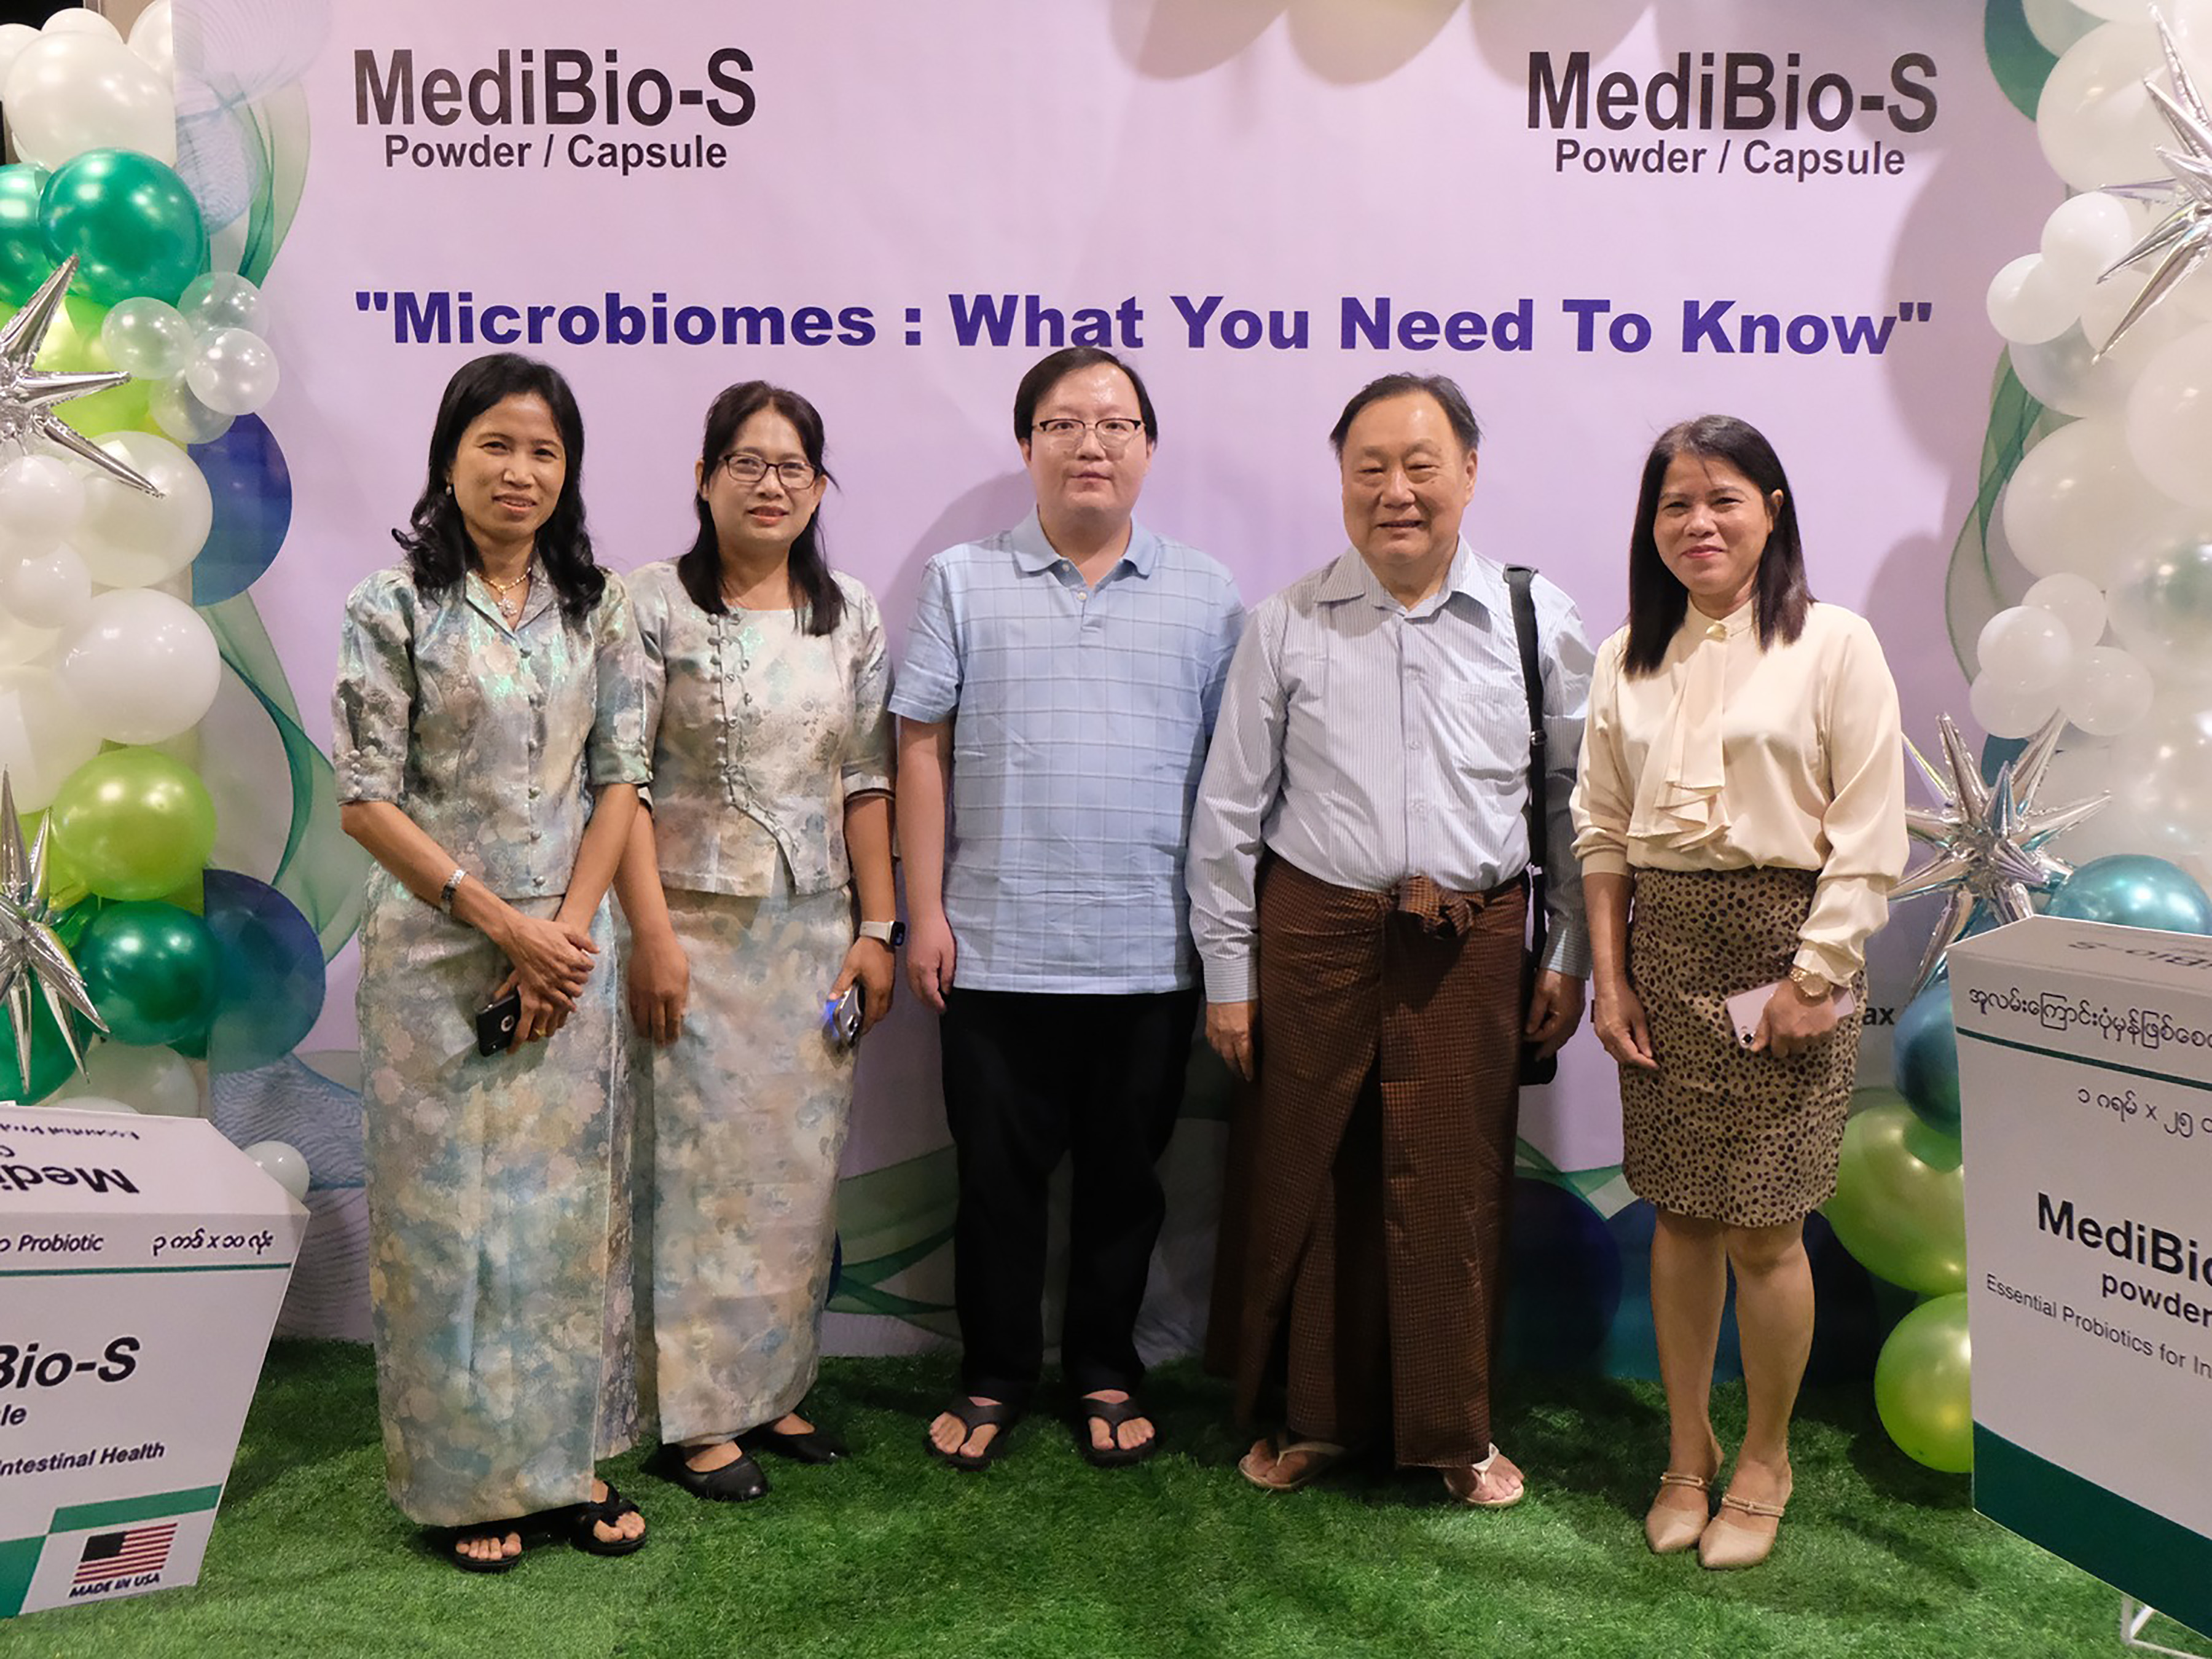 Hybrid Webinar on "Microbiomes: What You Need to Know" Organized by AA Medical Products Ltd